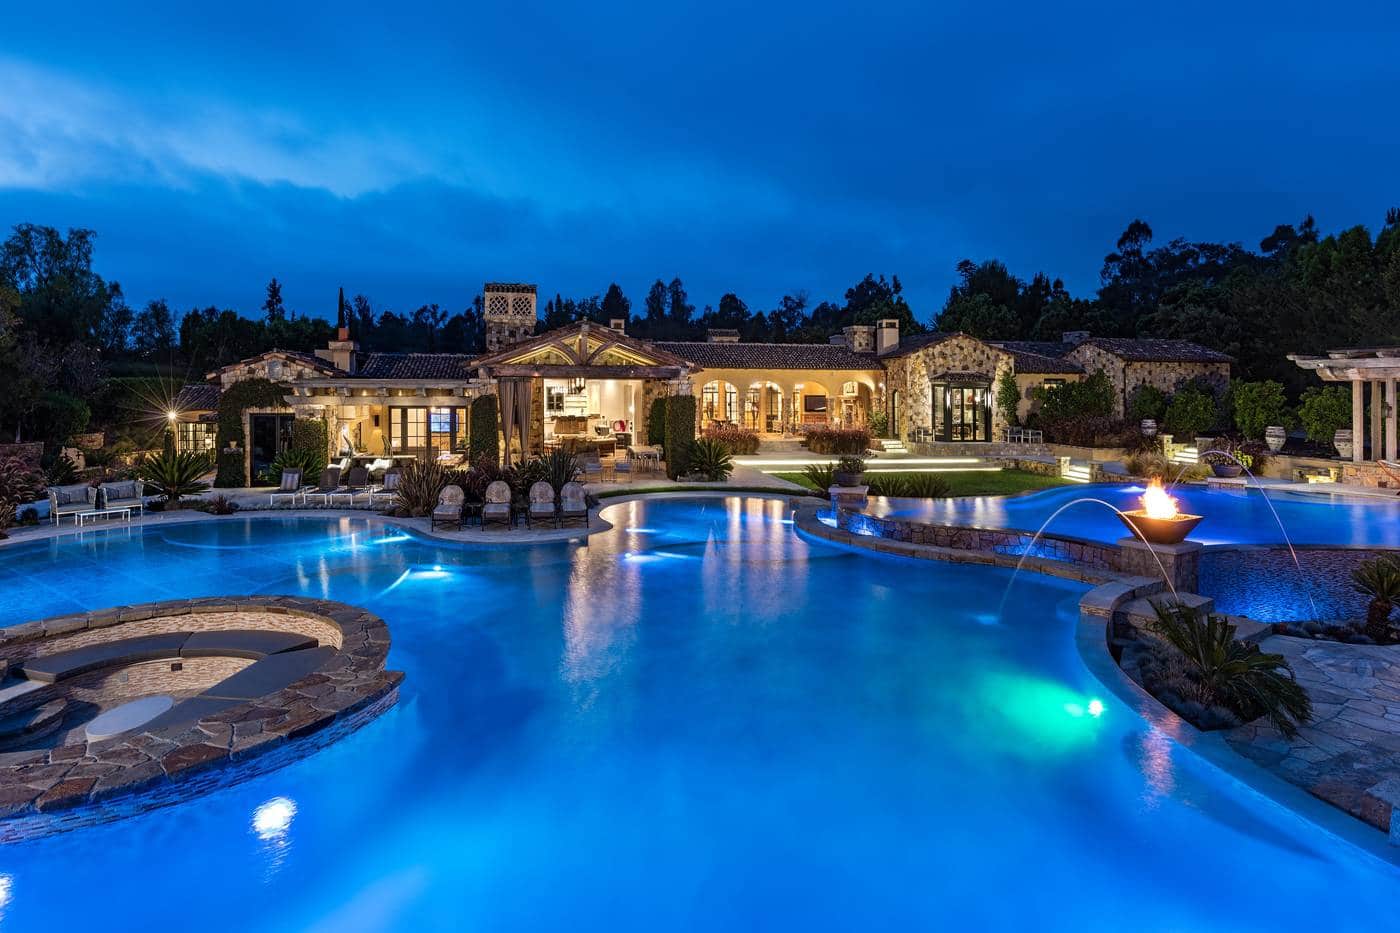 Inside Look At Clippers’ Superstar Kawhi Leonard’s New Mansion